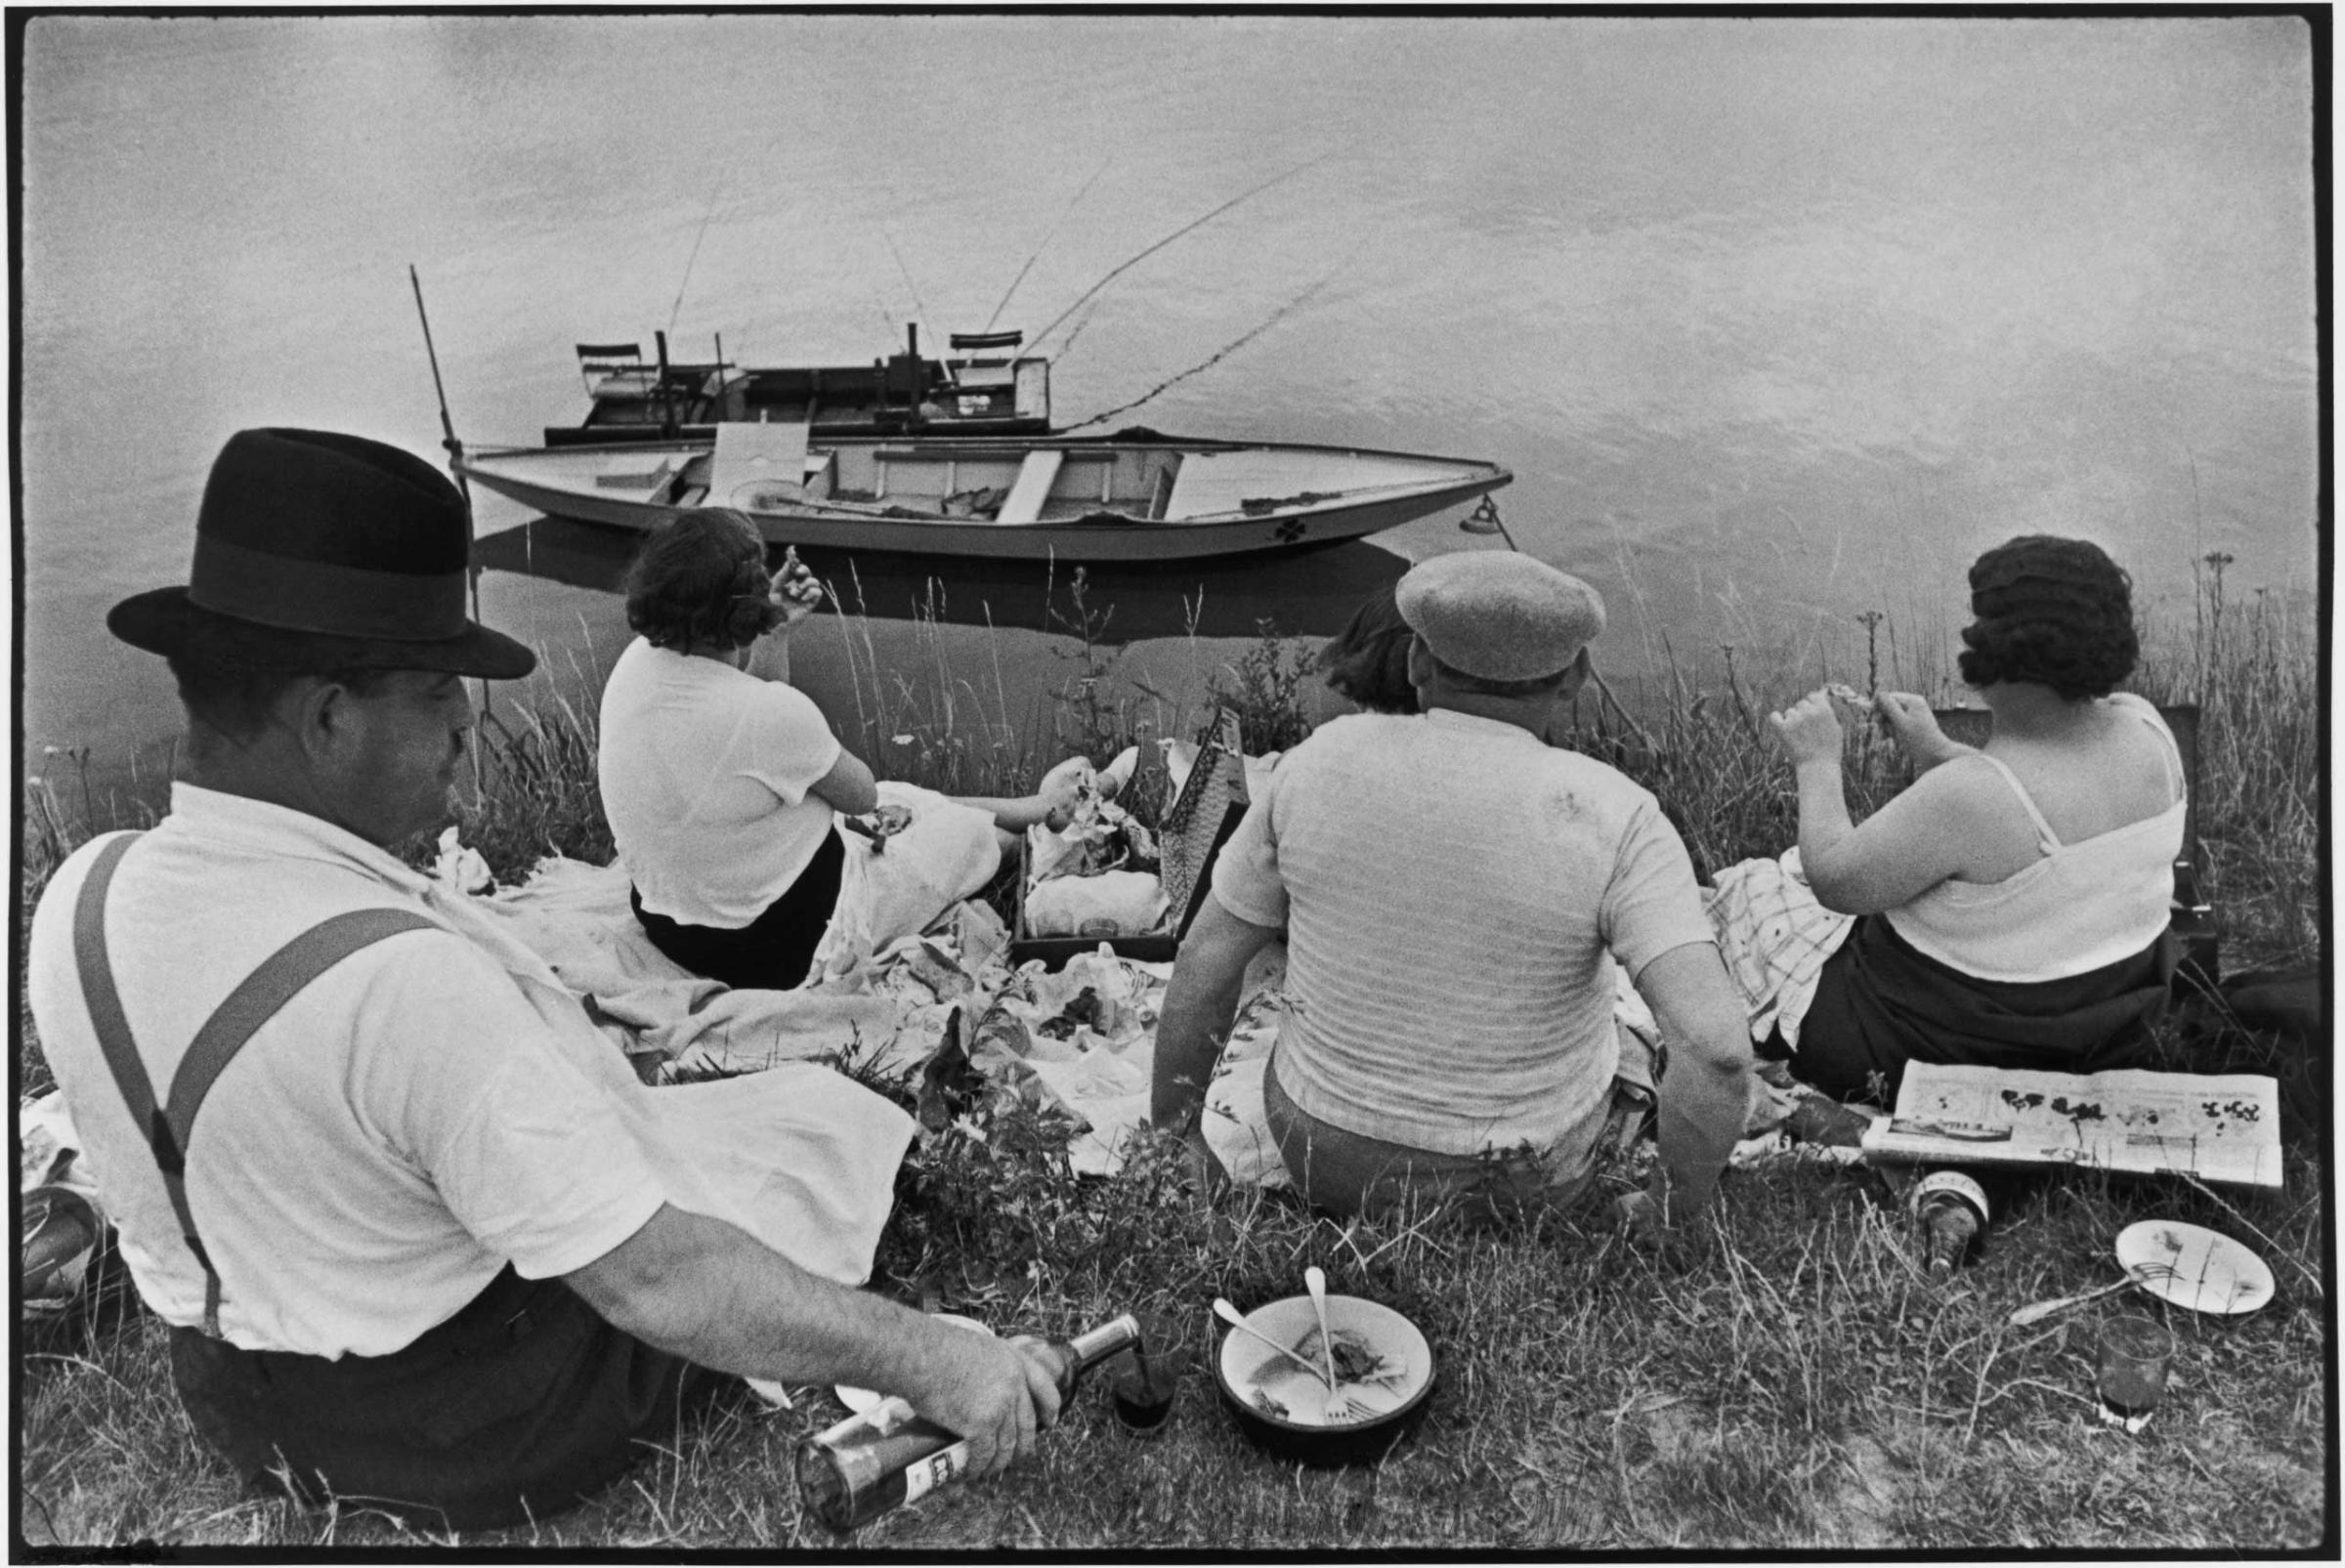 Sunday on the banks of the river Marne. France. 1938.